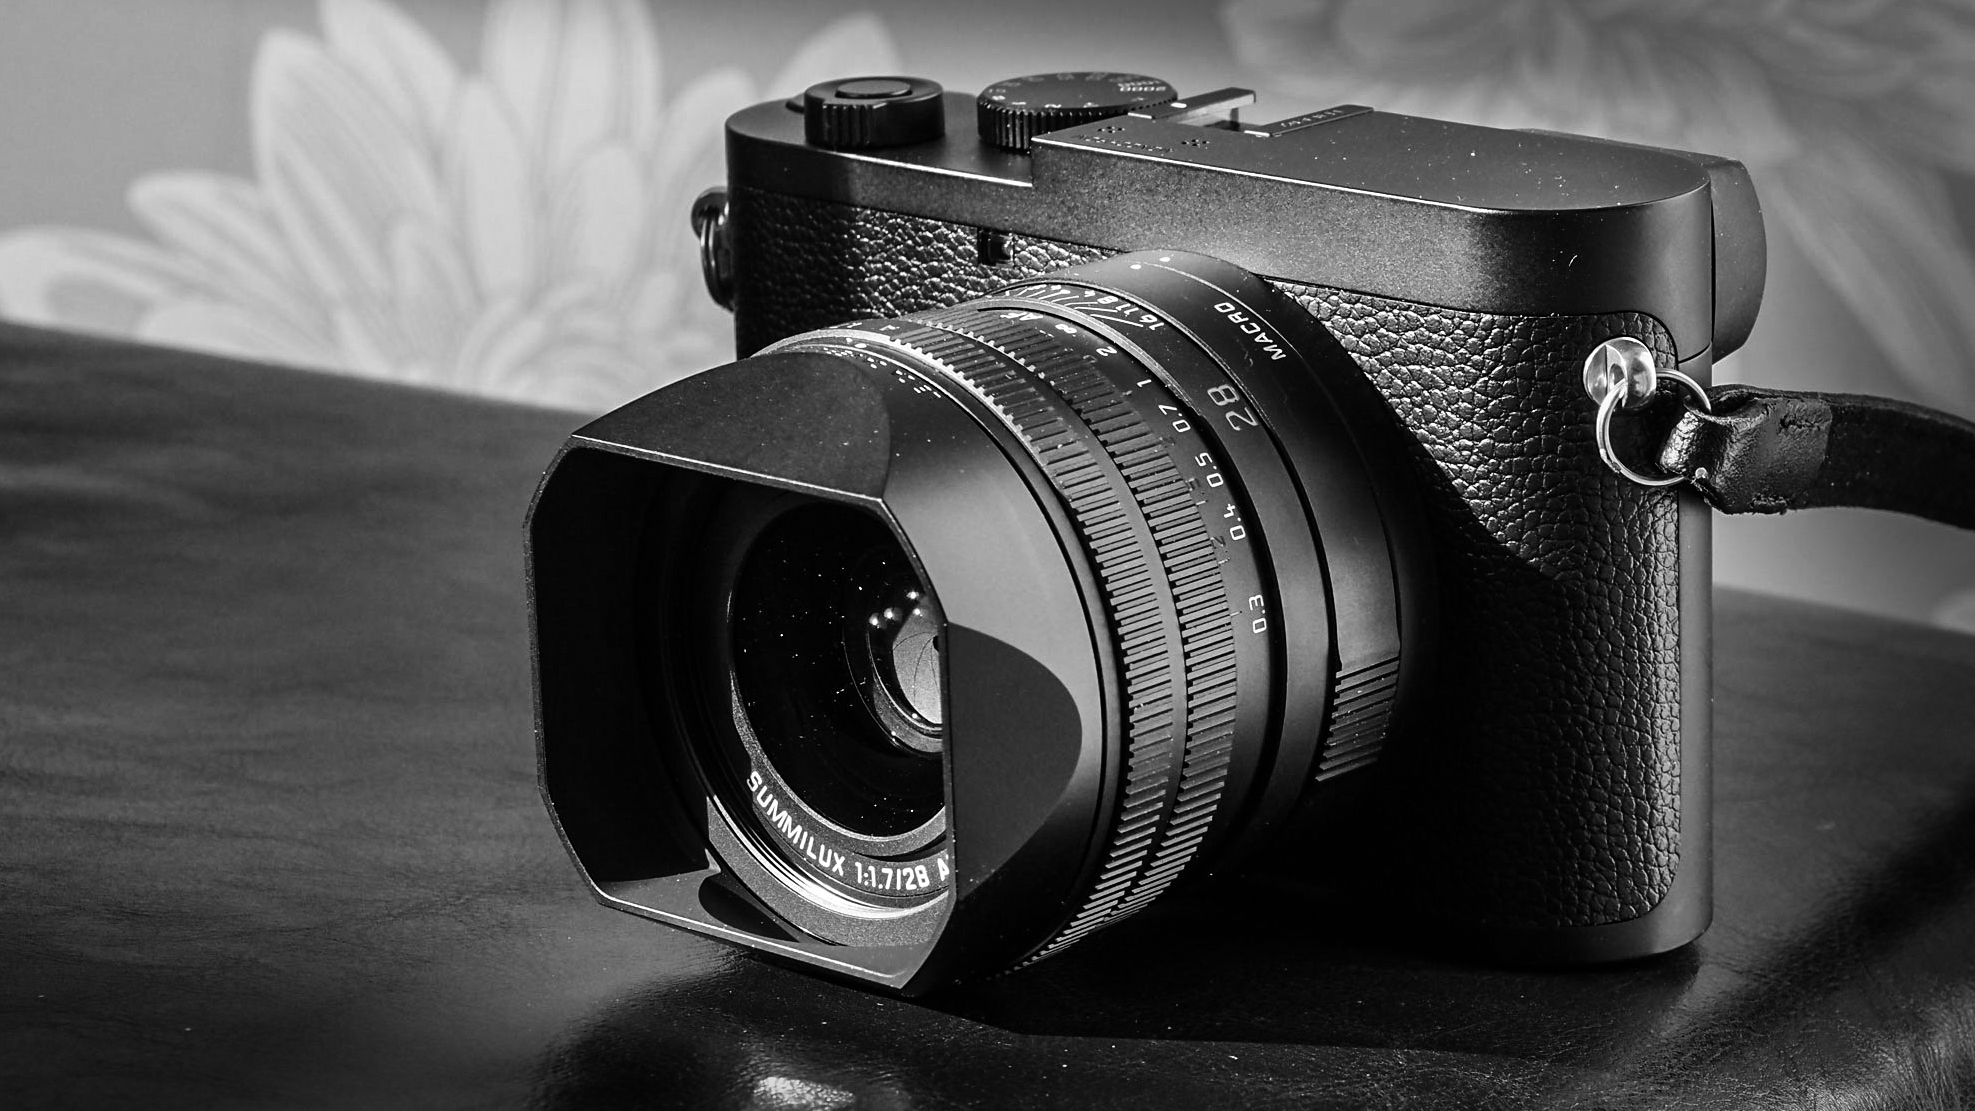 All About B&W: Best Frames For Black And White Photos